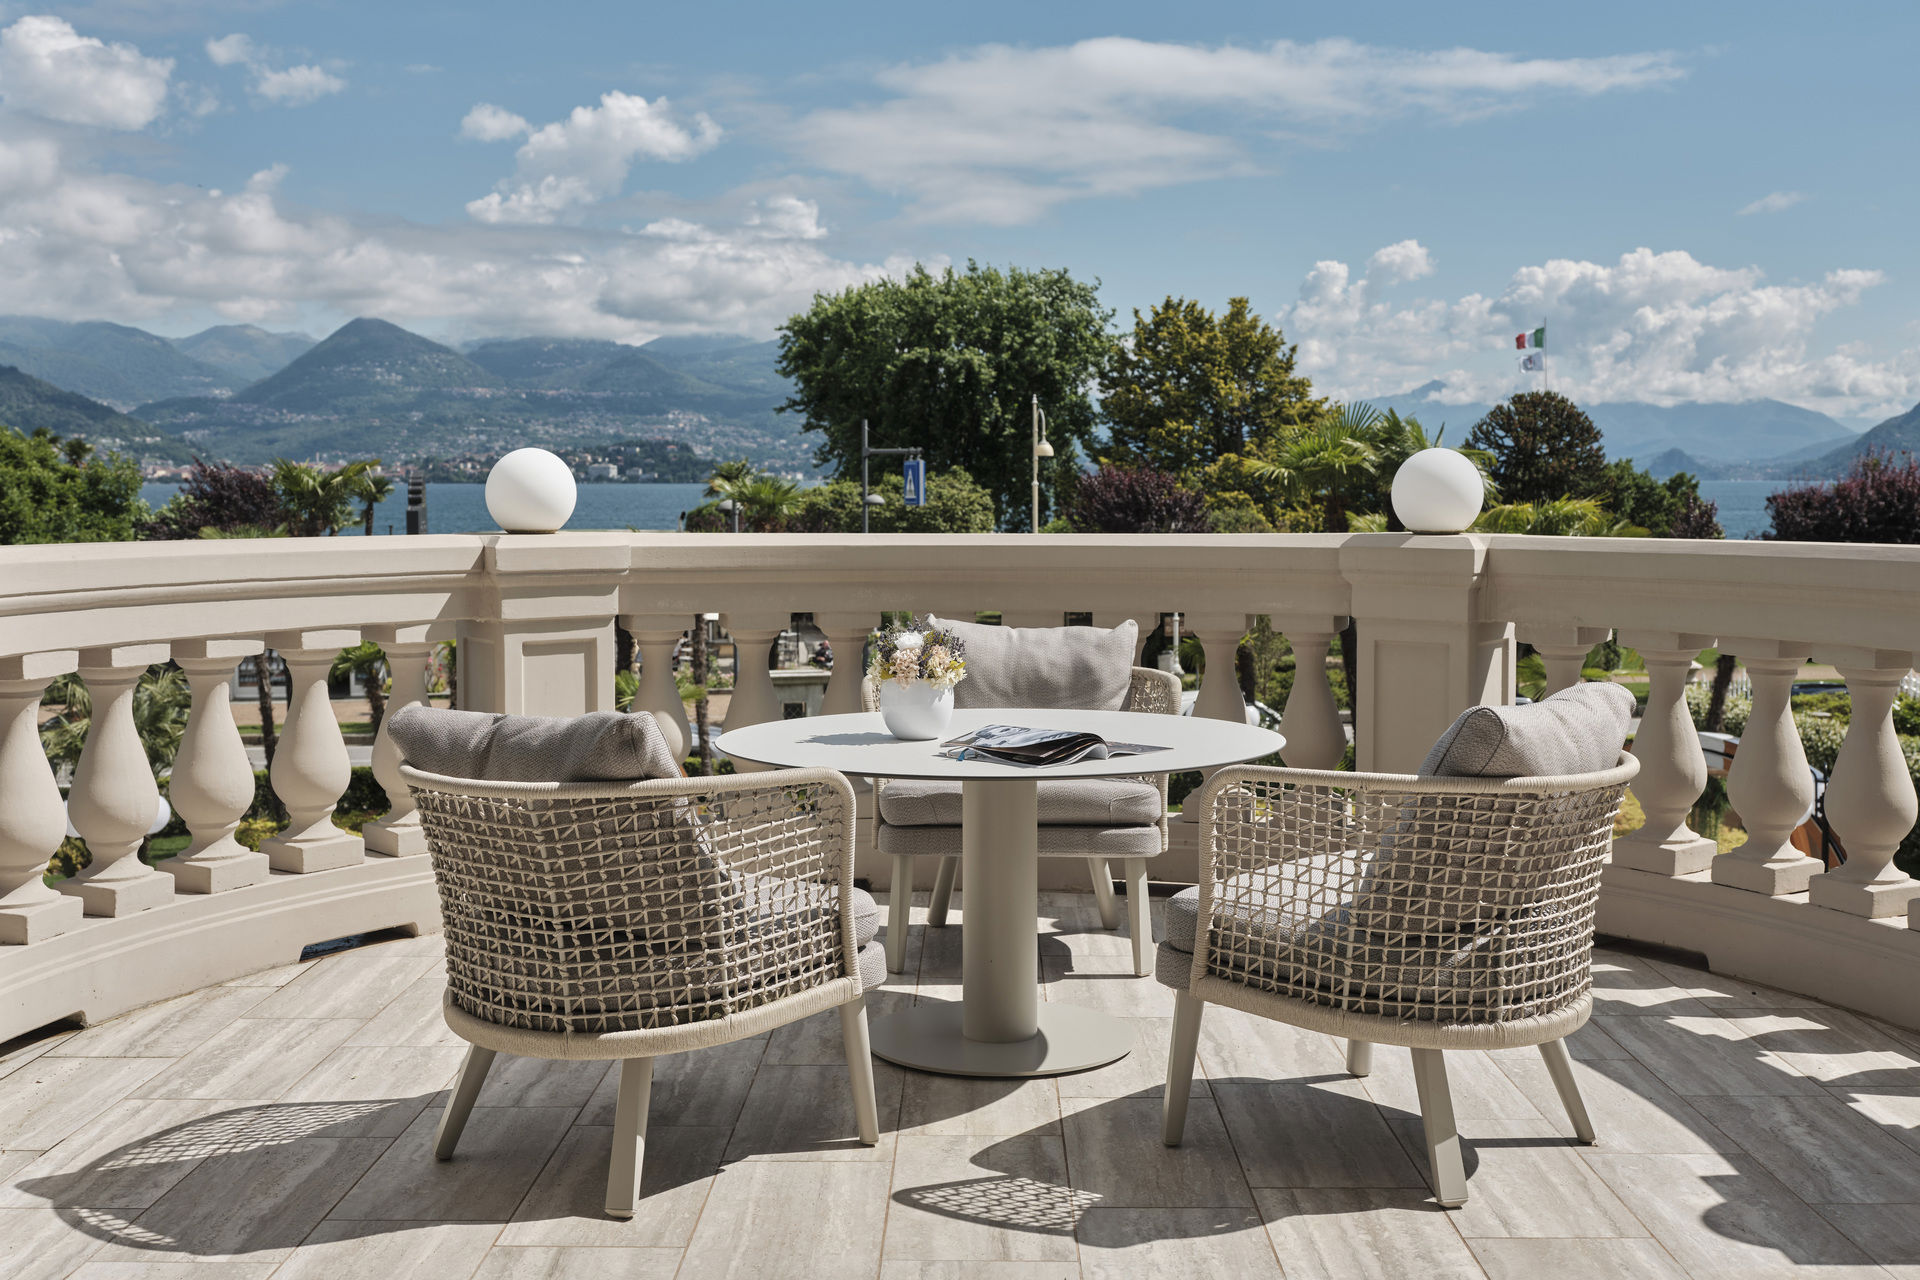 Boutique Hotel Stresa - Space, style and simplicity 1